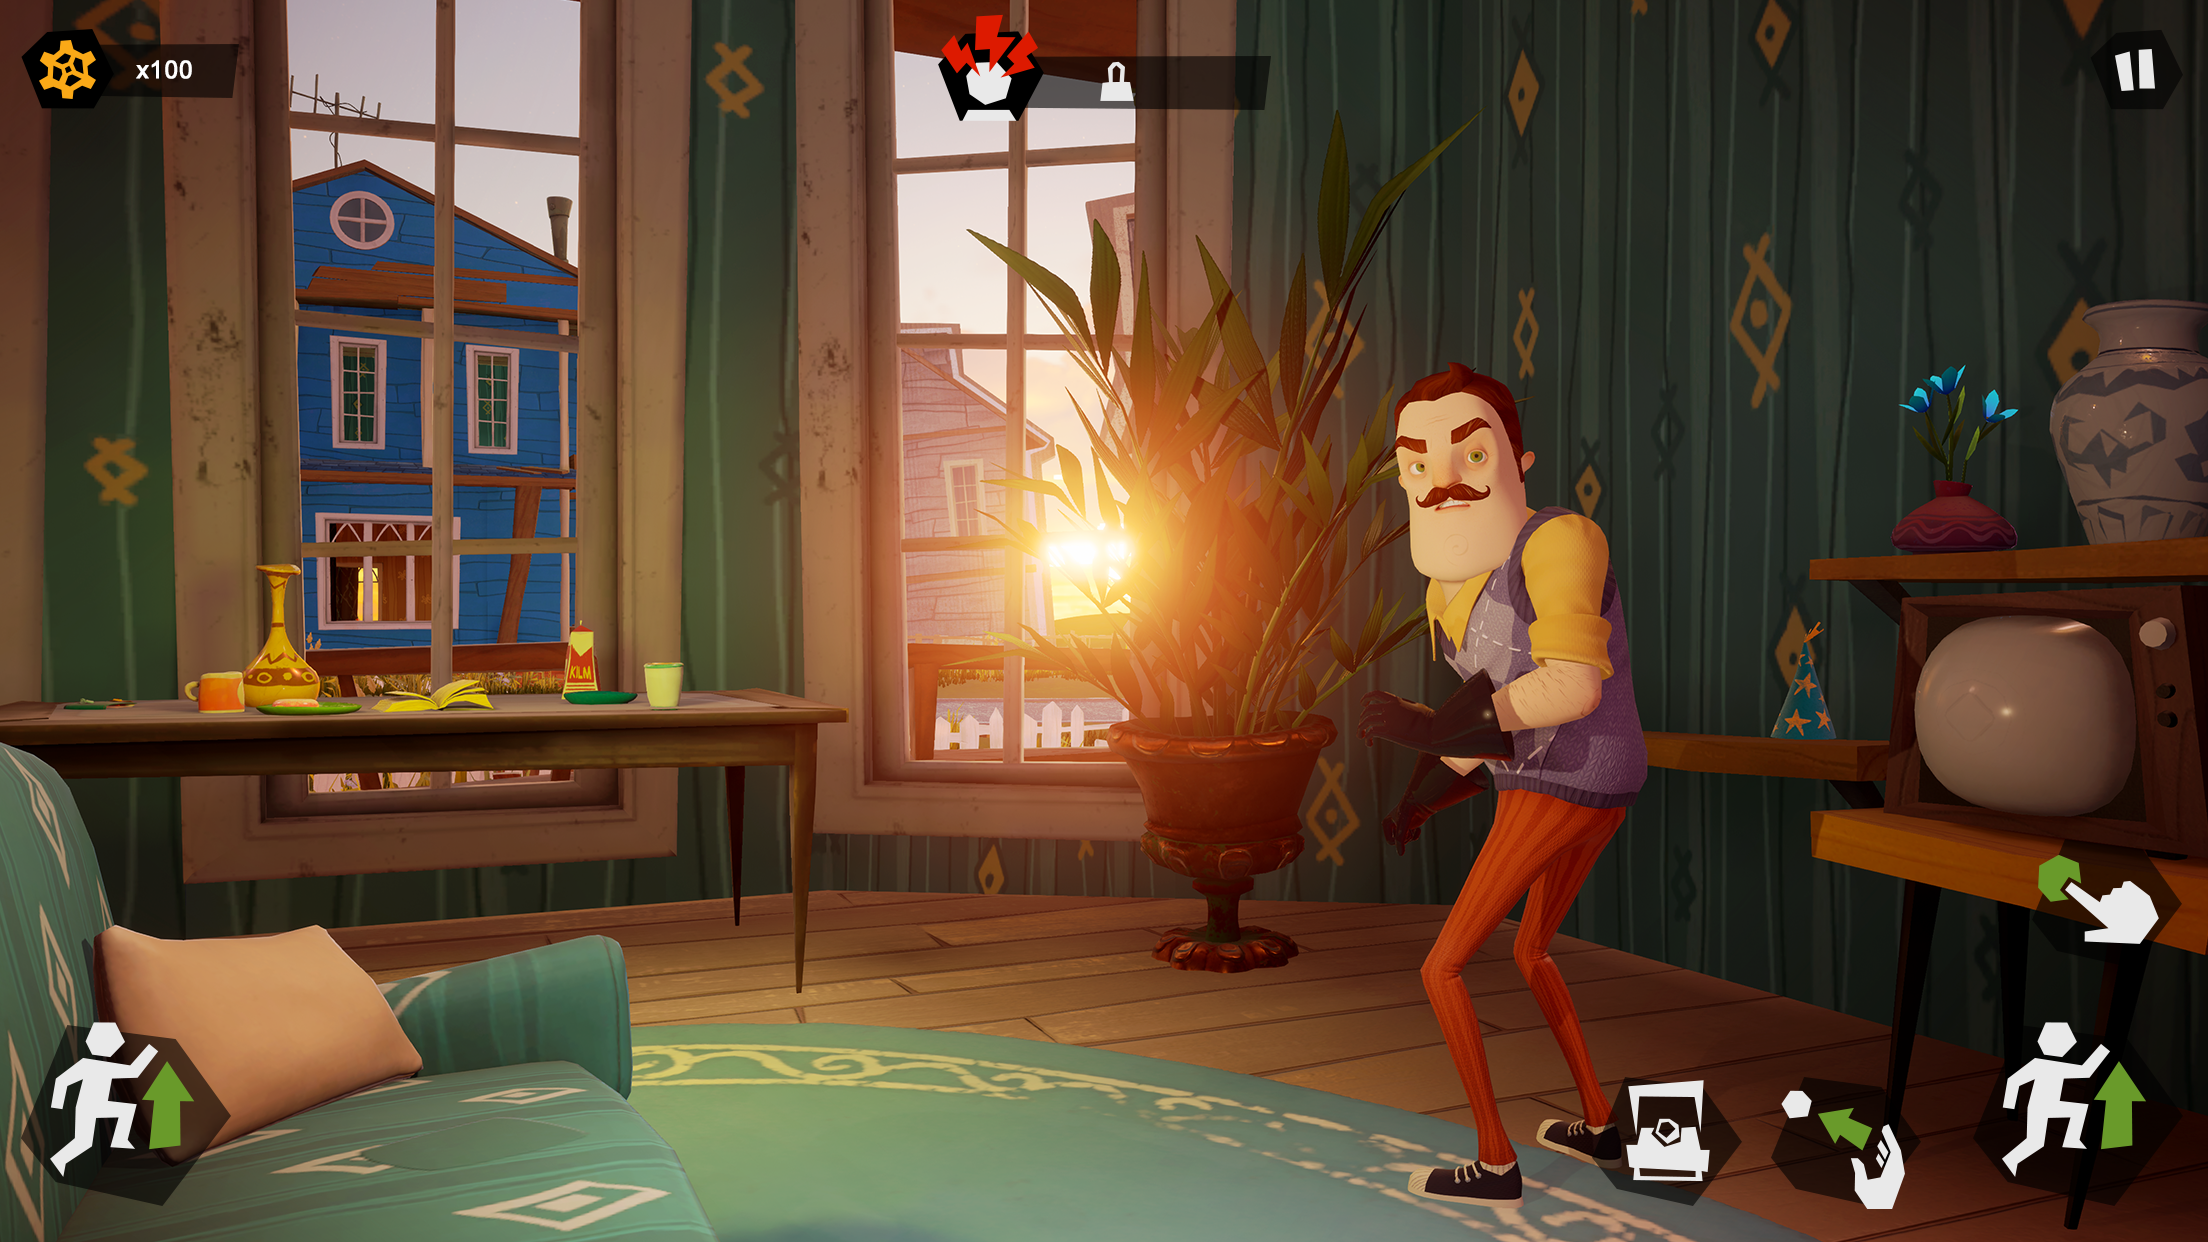 Download game Secret Neighbor for free Android and IOS